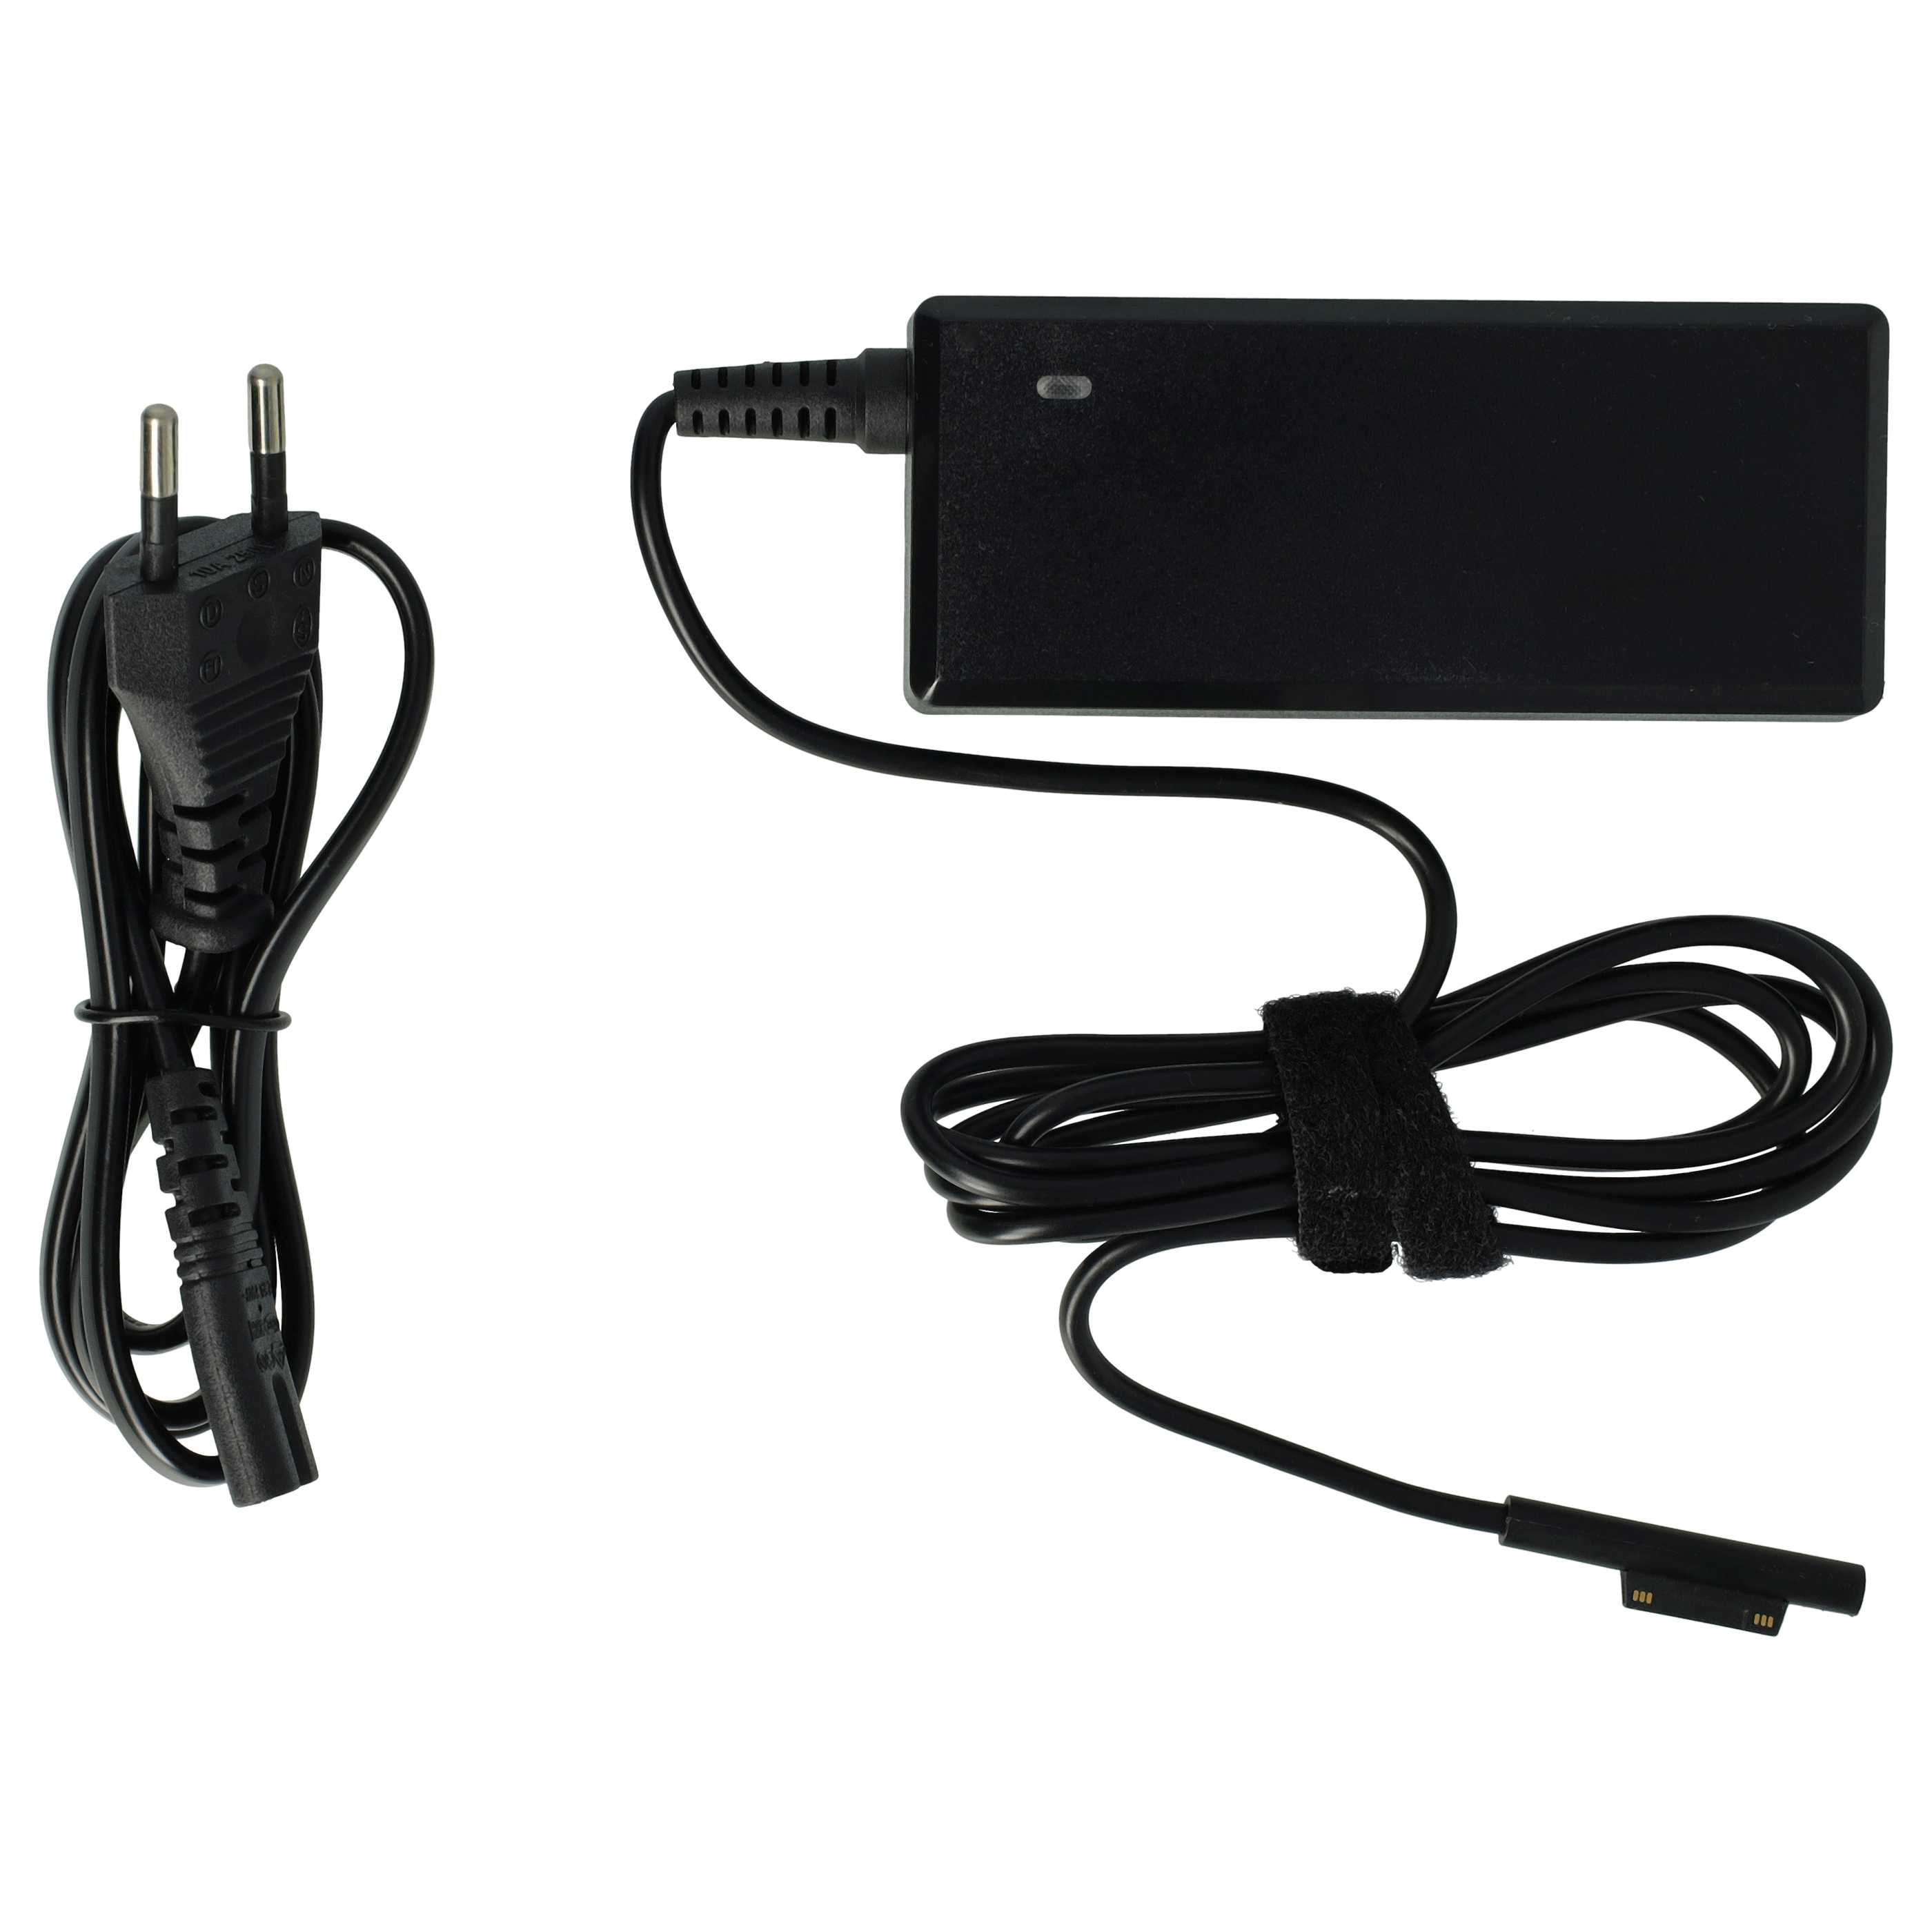 Mains Power Adapter replaces Microsoft A1706 for MicrosoftNotebook